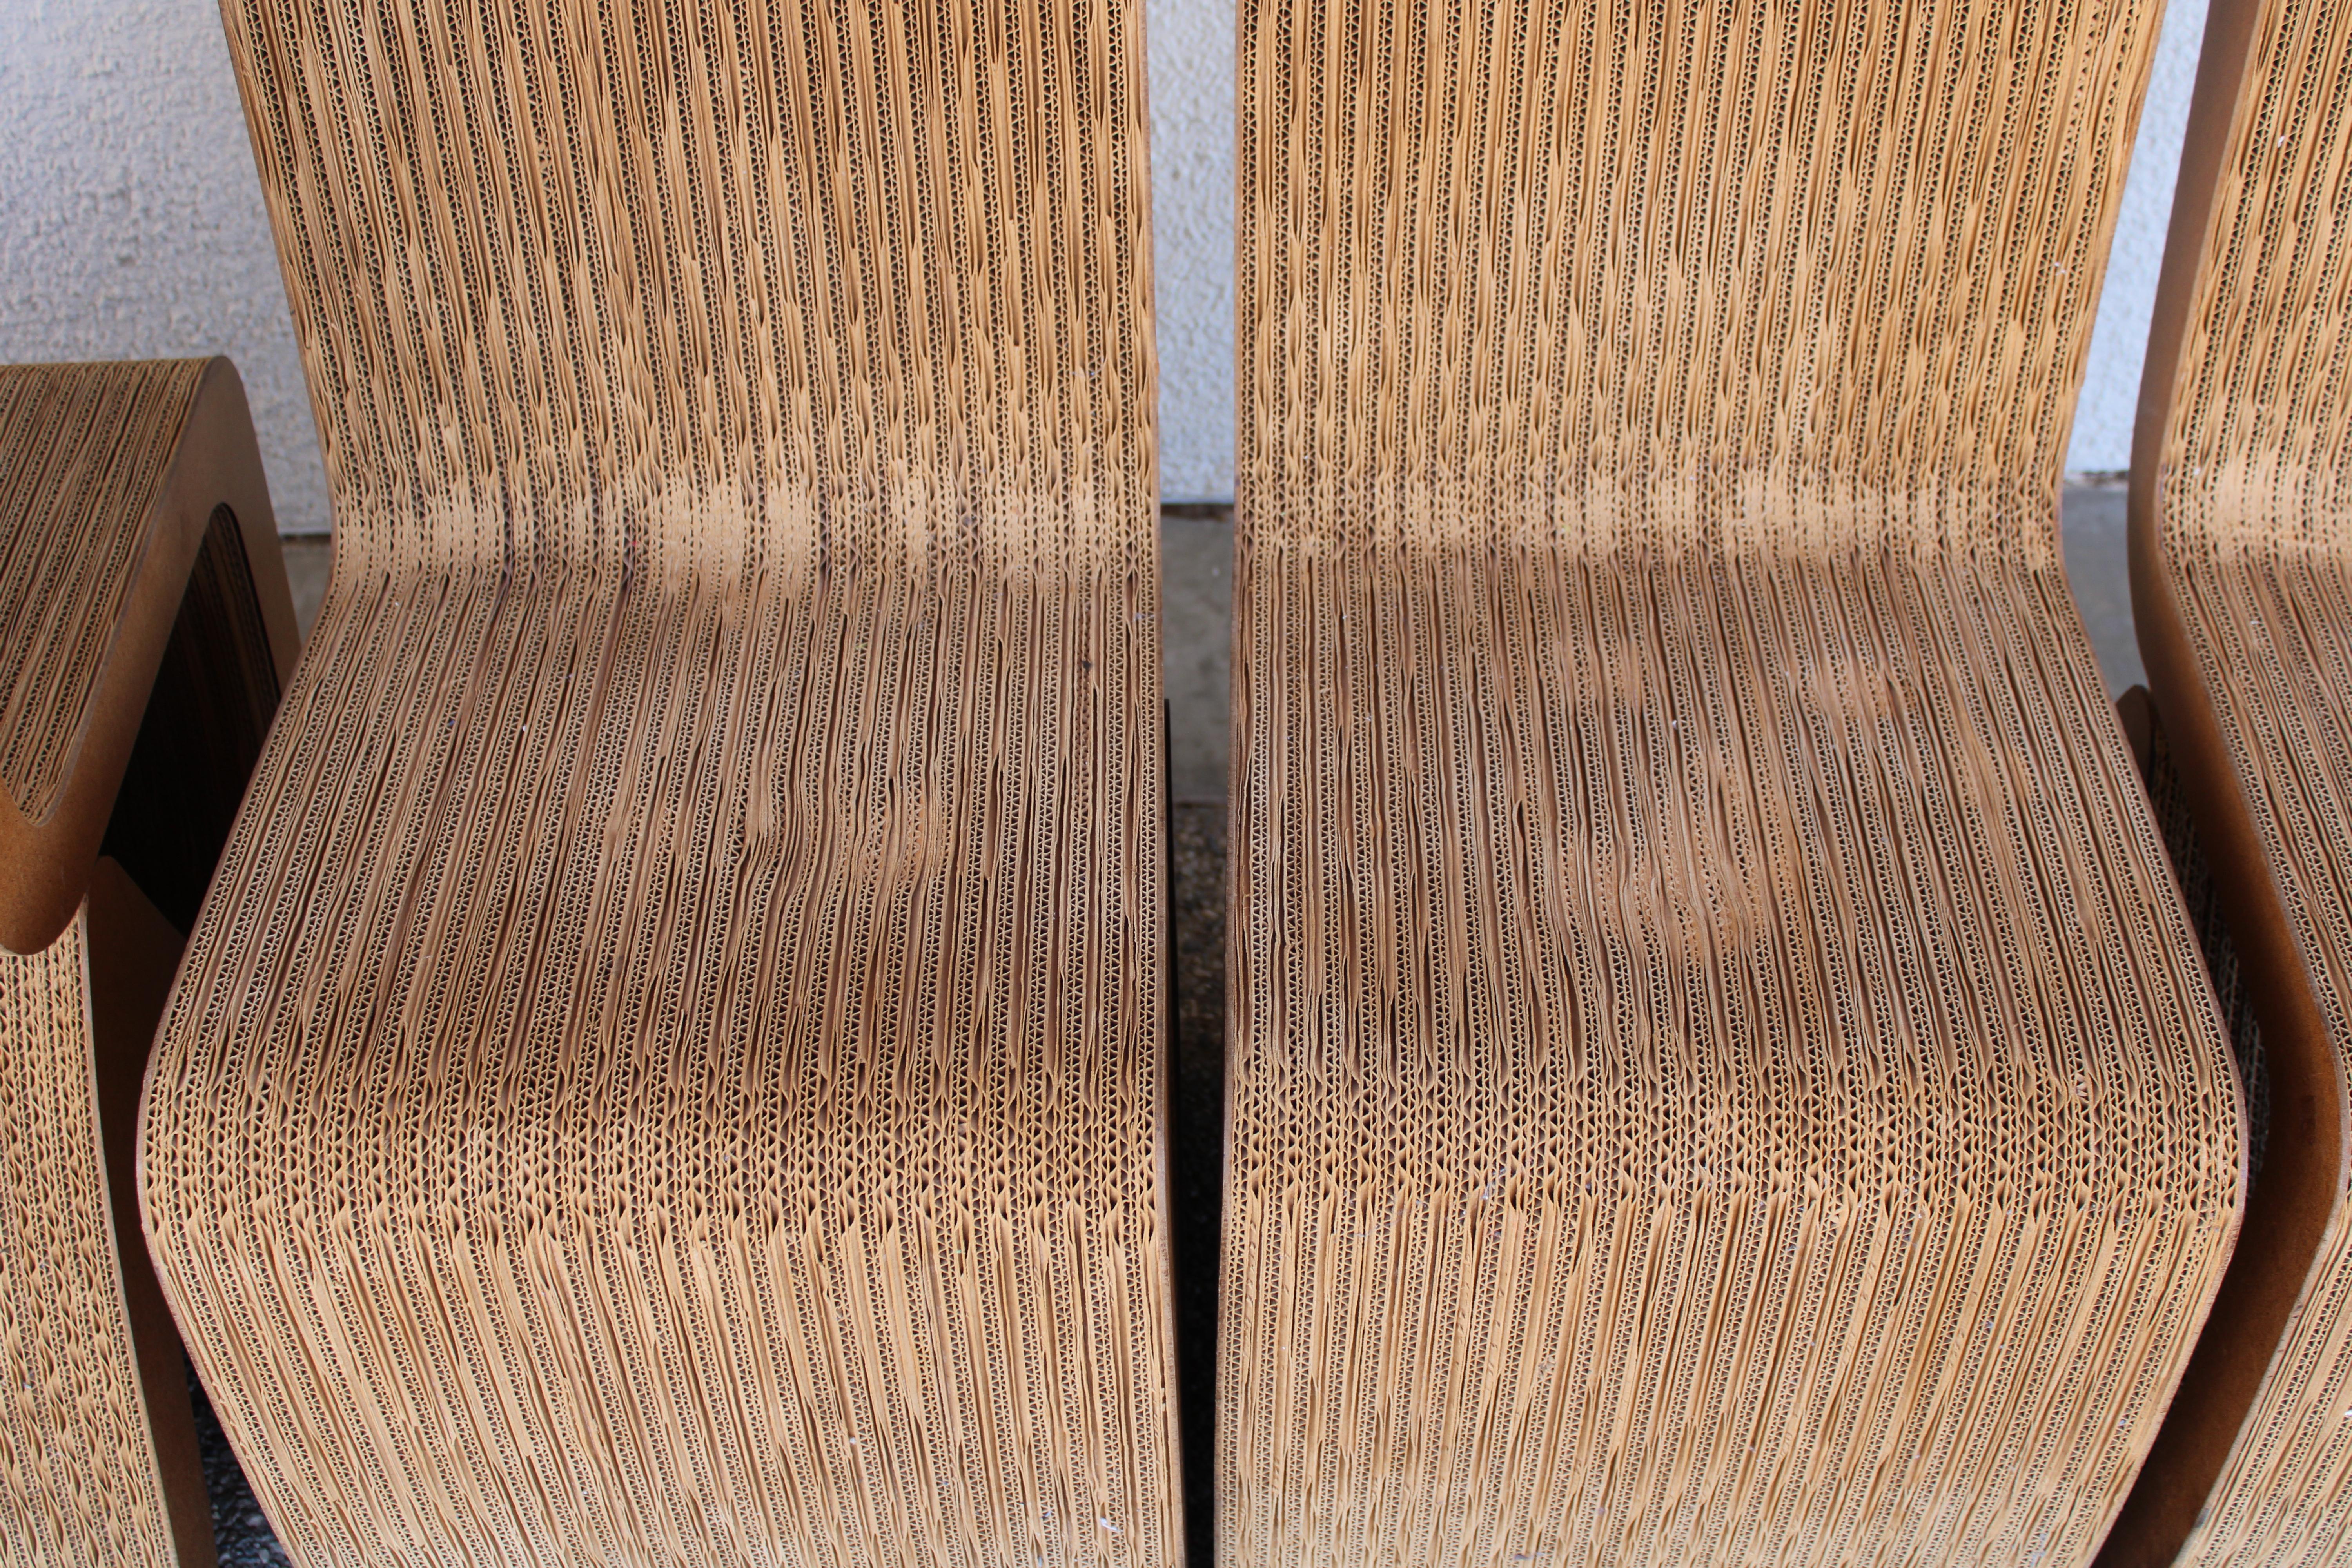 Paper Six Corrugated Chairs Attributed to Frank Gehry For Sale